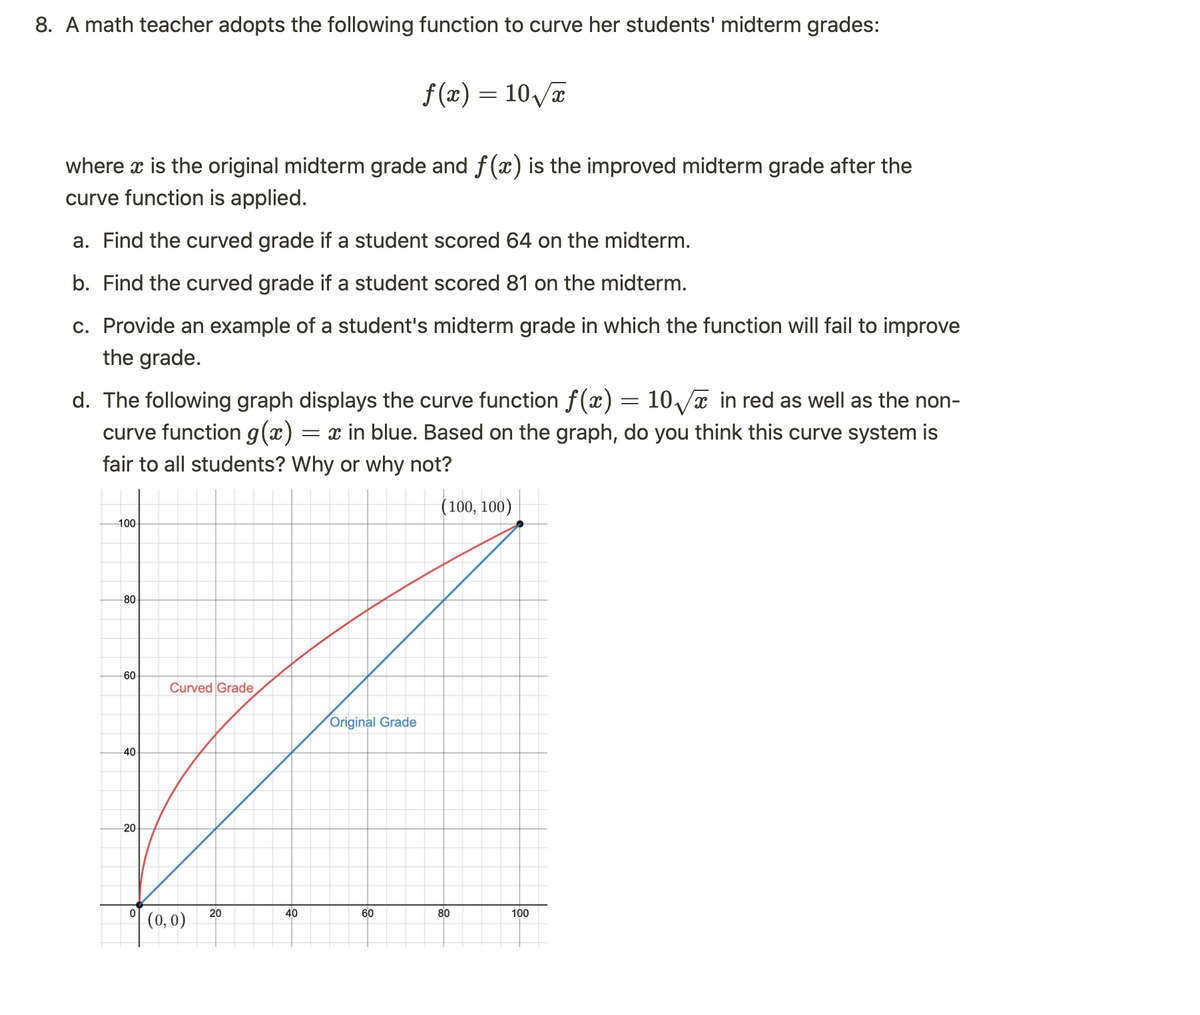 8. A math teacher adopts the following function to curve her students' midterm grades:
where x is the original midterm grade and f(x) is the improved midterm grade after the
curve function is applied.
a. Find the curved grade if a student scored 64 on the midterm.
b. Find the curved grade if a student scored 81 on the midterm.
c. Provide an example of a student's midterm grade in which the function will fail to improve
the grade.
d. The following graph displays the curve function f(x) = 10√√x in red as well as the non-
curve function g(x) = x in blue. Based on the graph, do you think this curve system is
fair to all students? Why or why not?
(100, 100)
100
60
Curved Grade
f
Original Grade
80
40
20
0
(0,0)
f(x) = 10√x
20
40
60
80
100